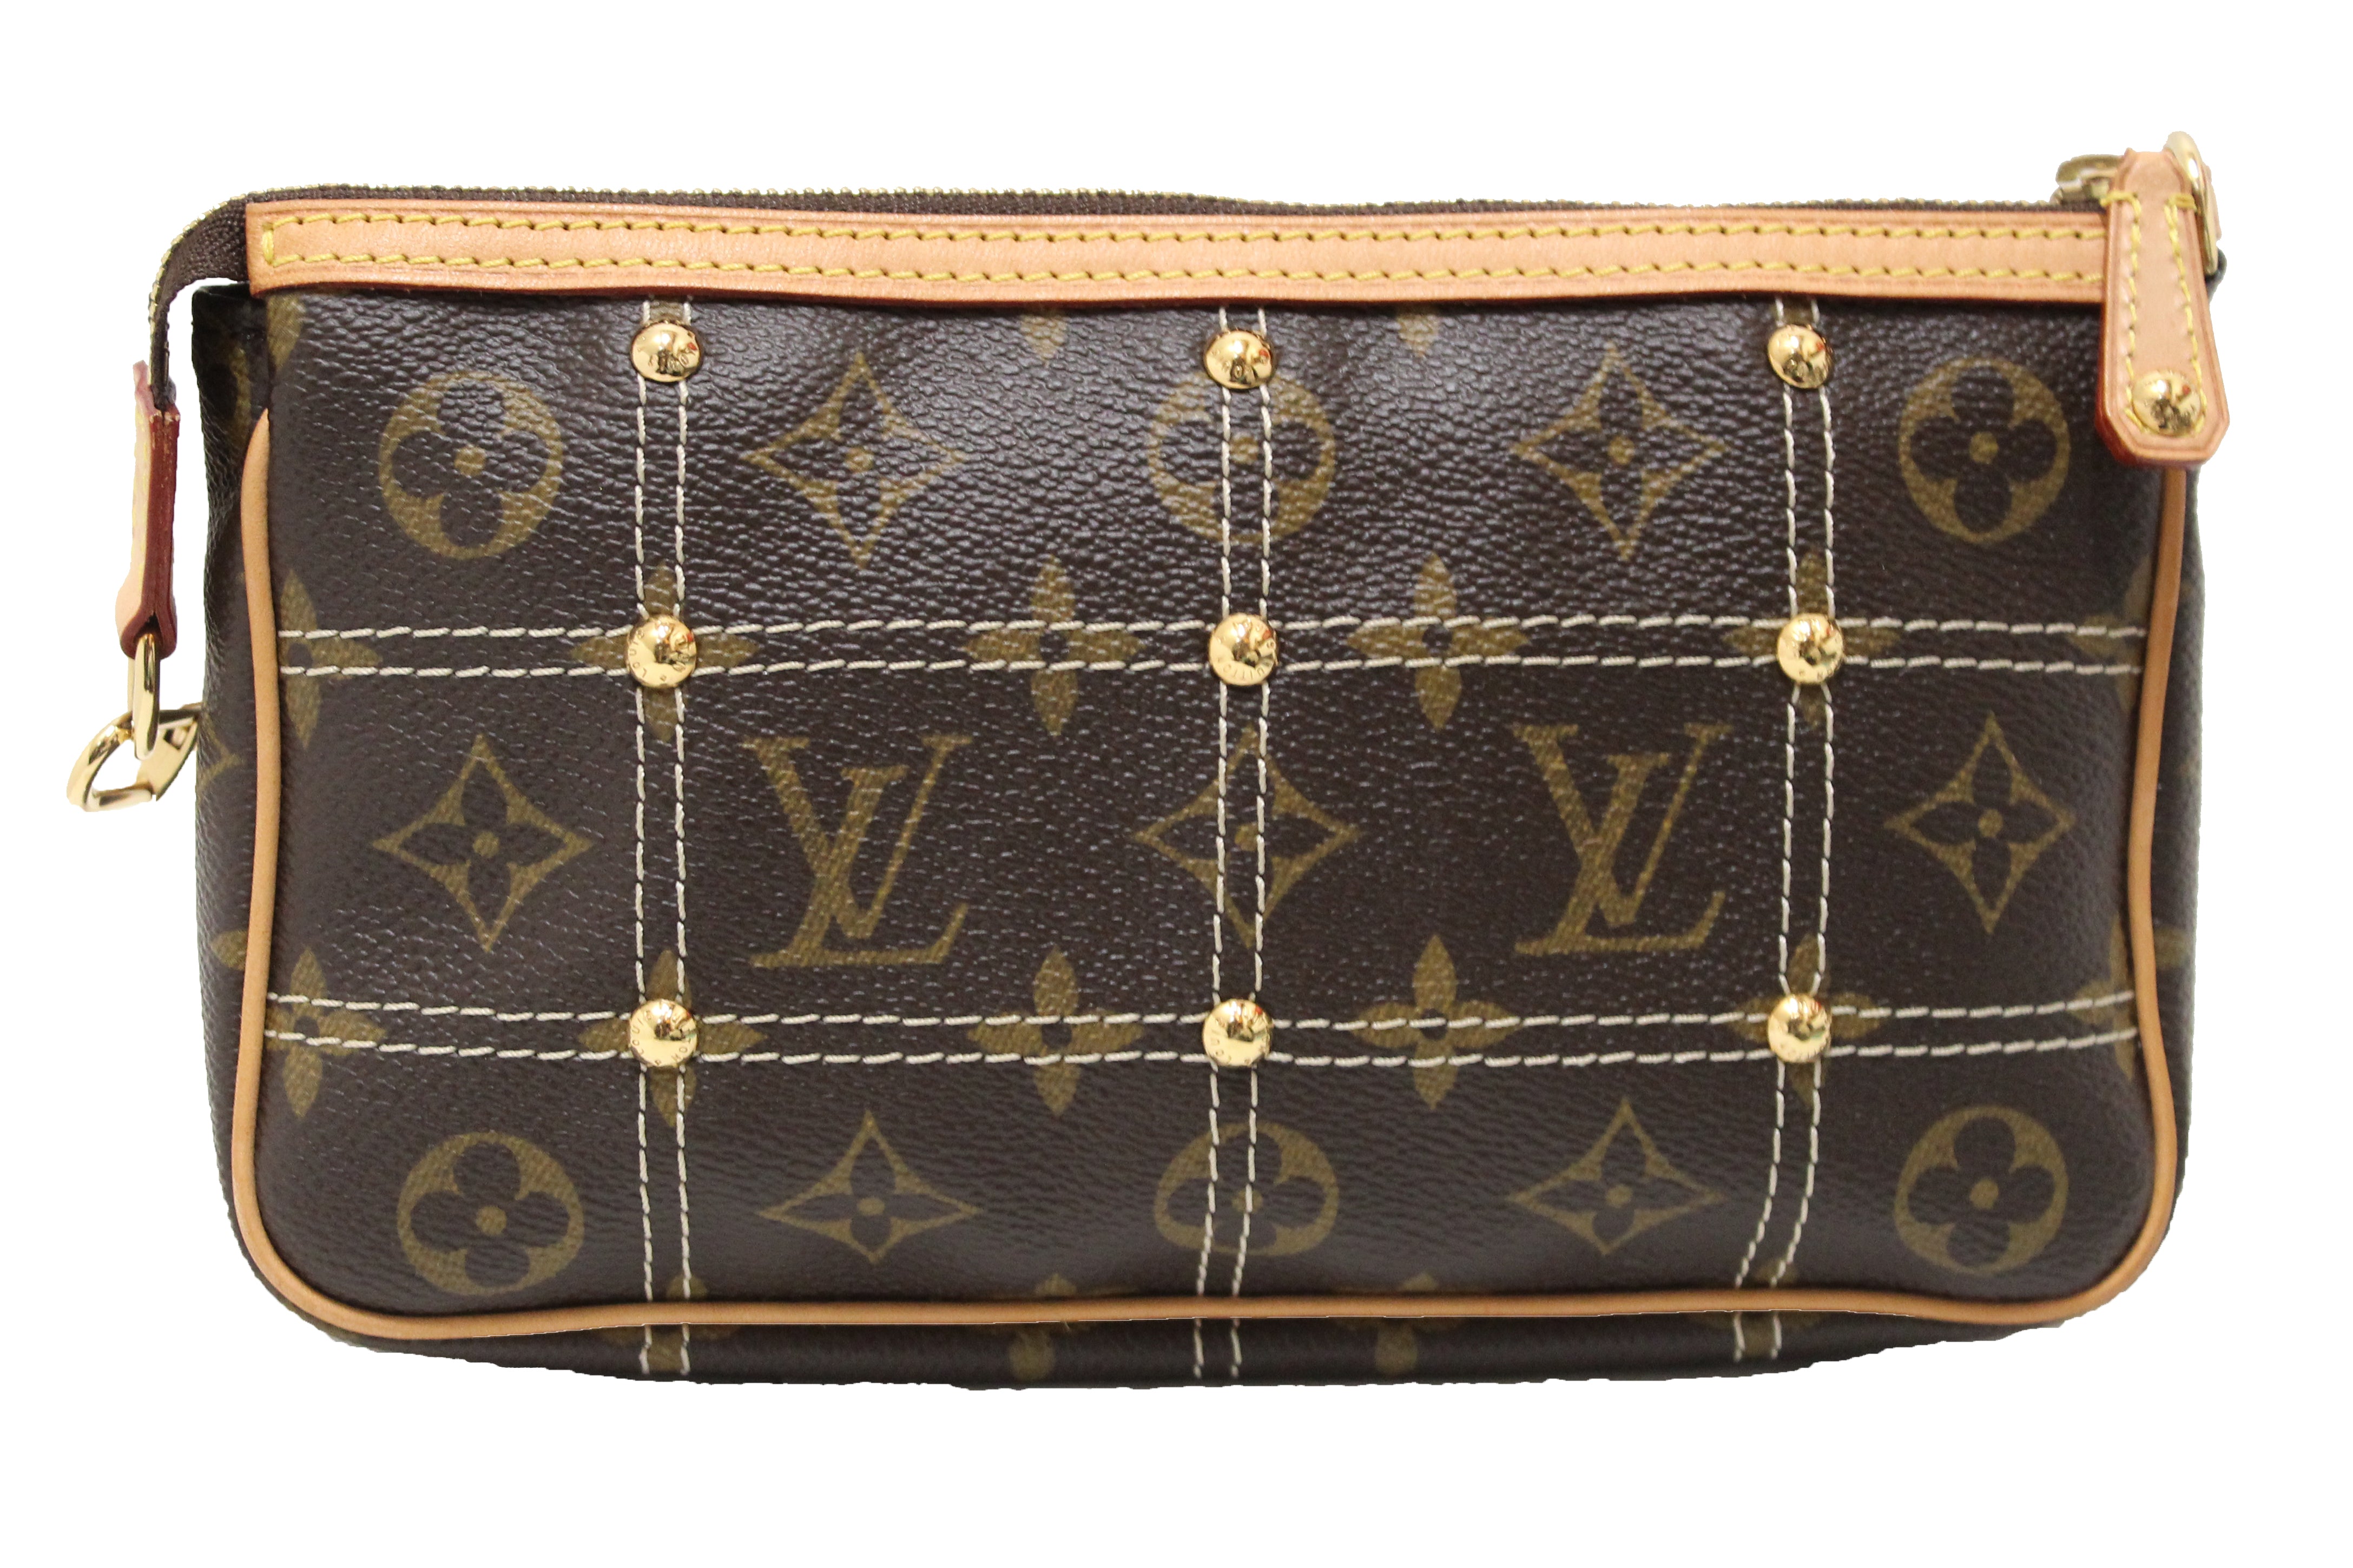 Preowned Authentic Louis Vuitton Limited Edition Coated Canvas